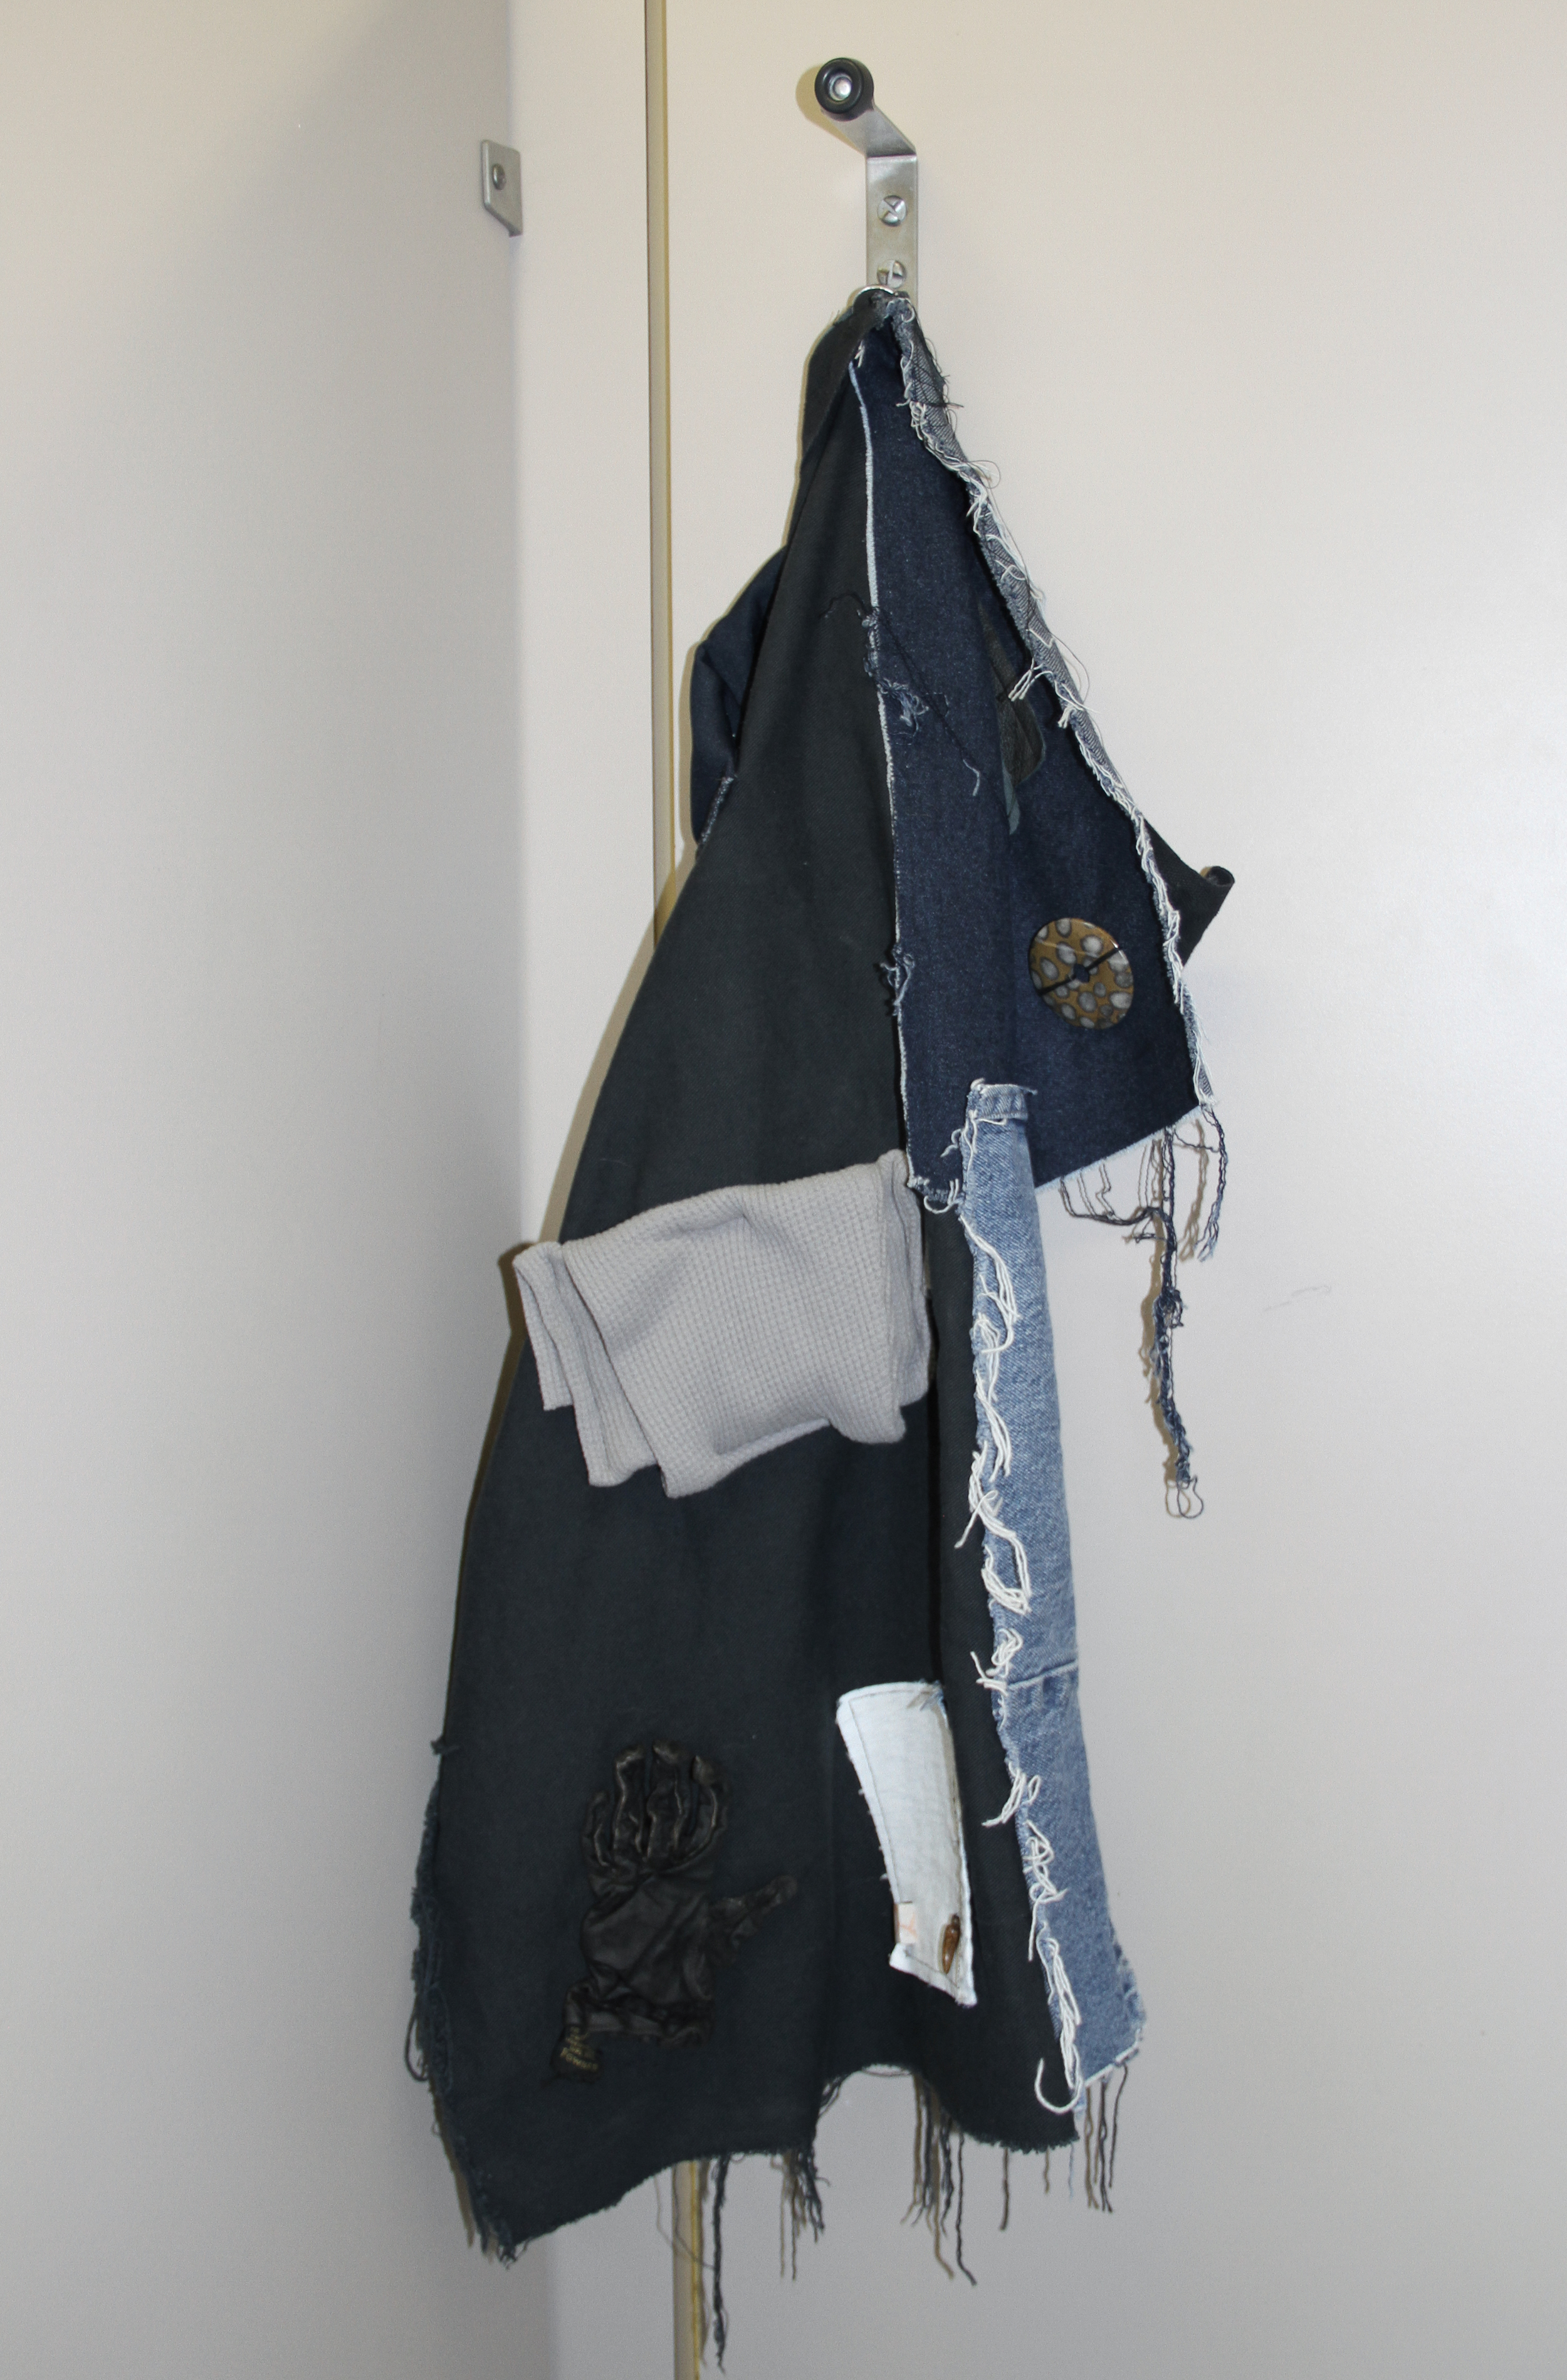   Catherine Czacki © 2016 ,  Not a Master, part III . Denim, leather, beads, stone, plastic, paint. 34 x 17 x 17 in. *Accompanied by text: Open. Courtesy of the artist. 